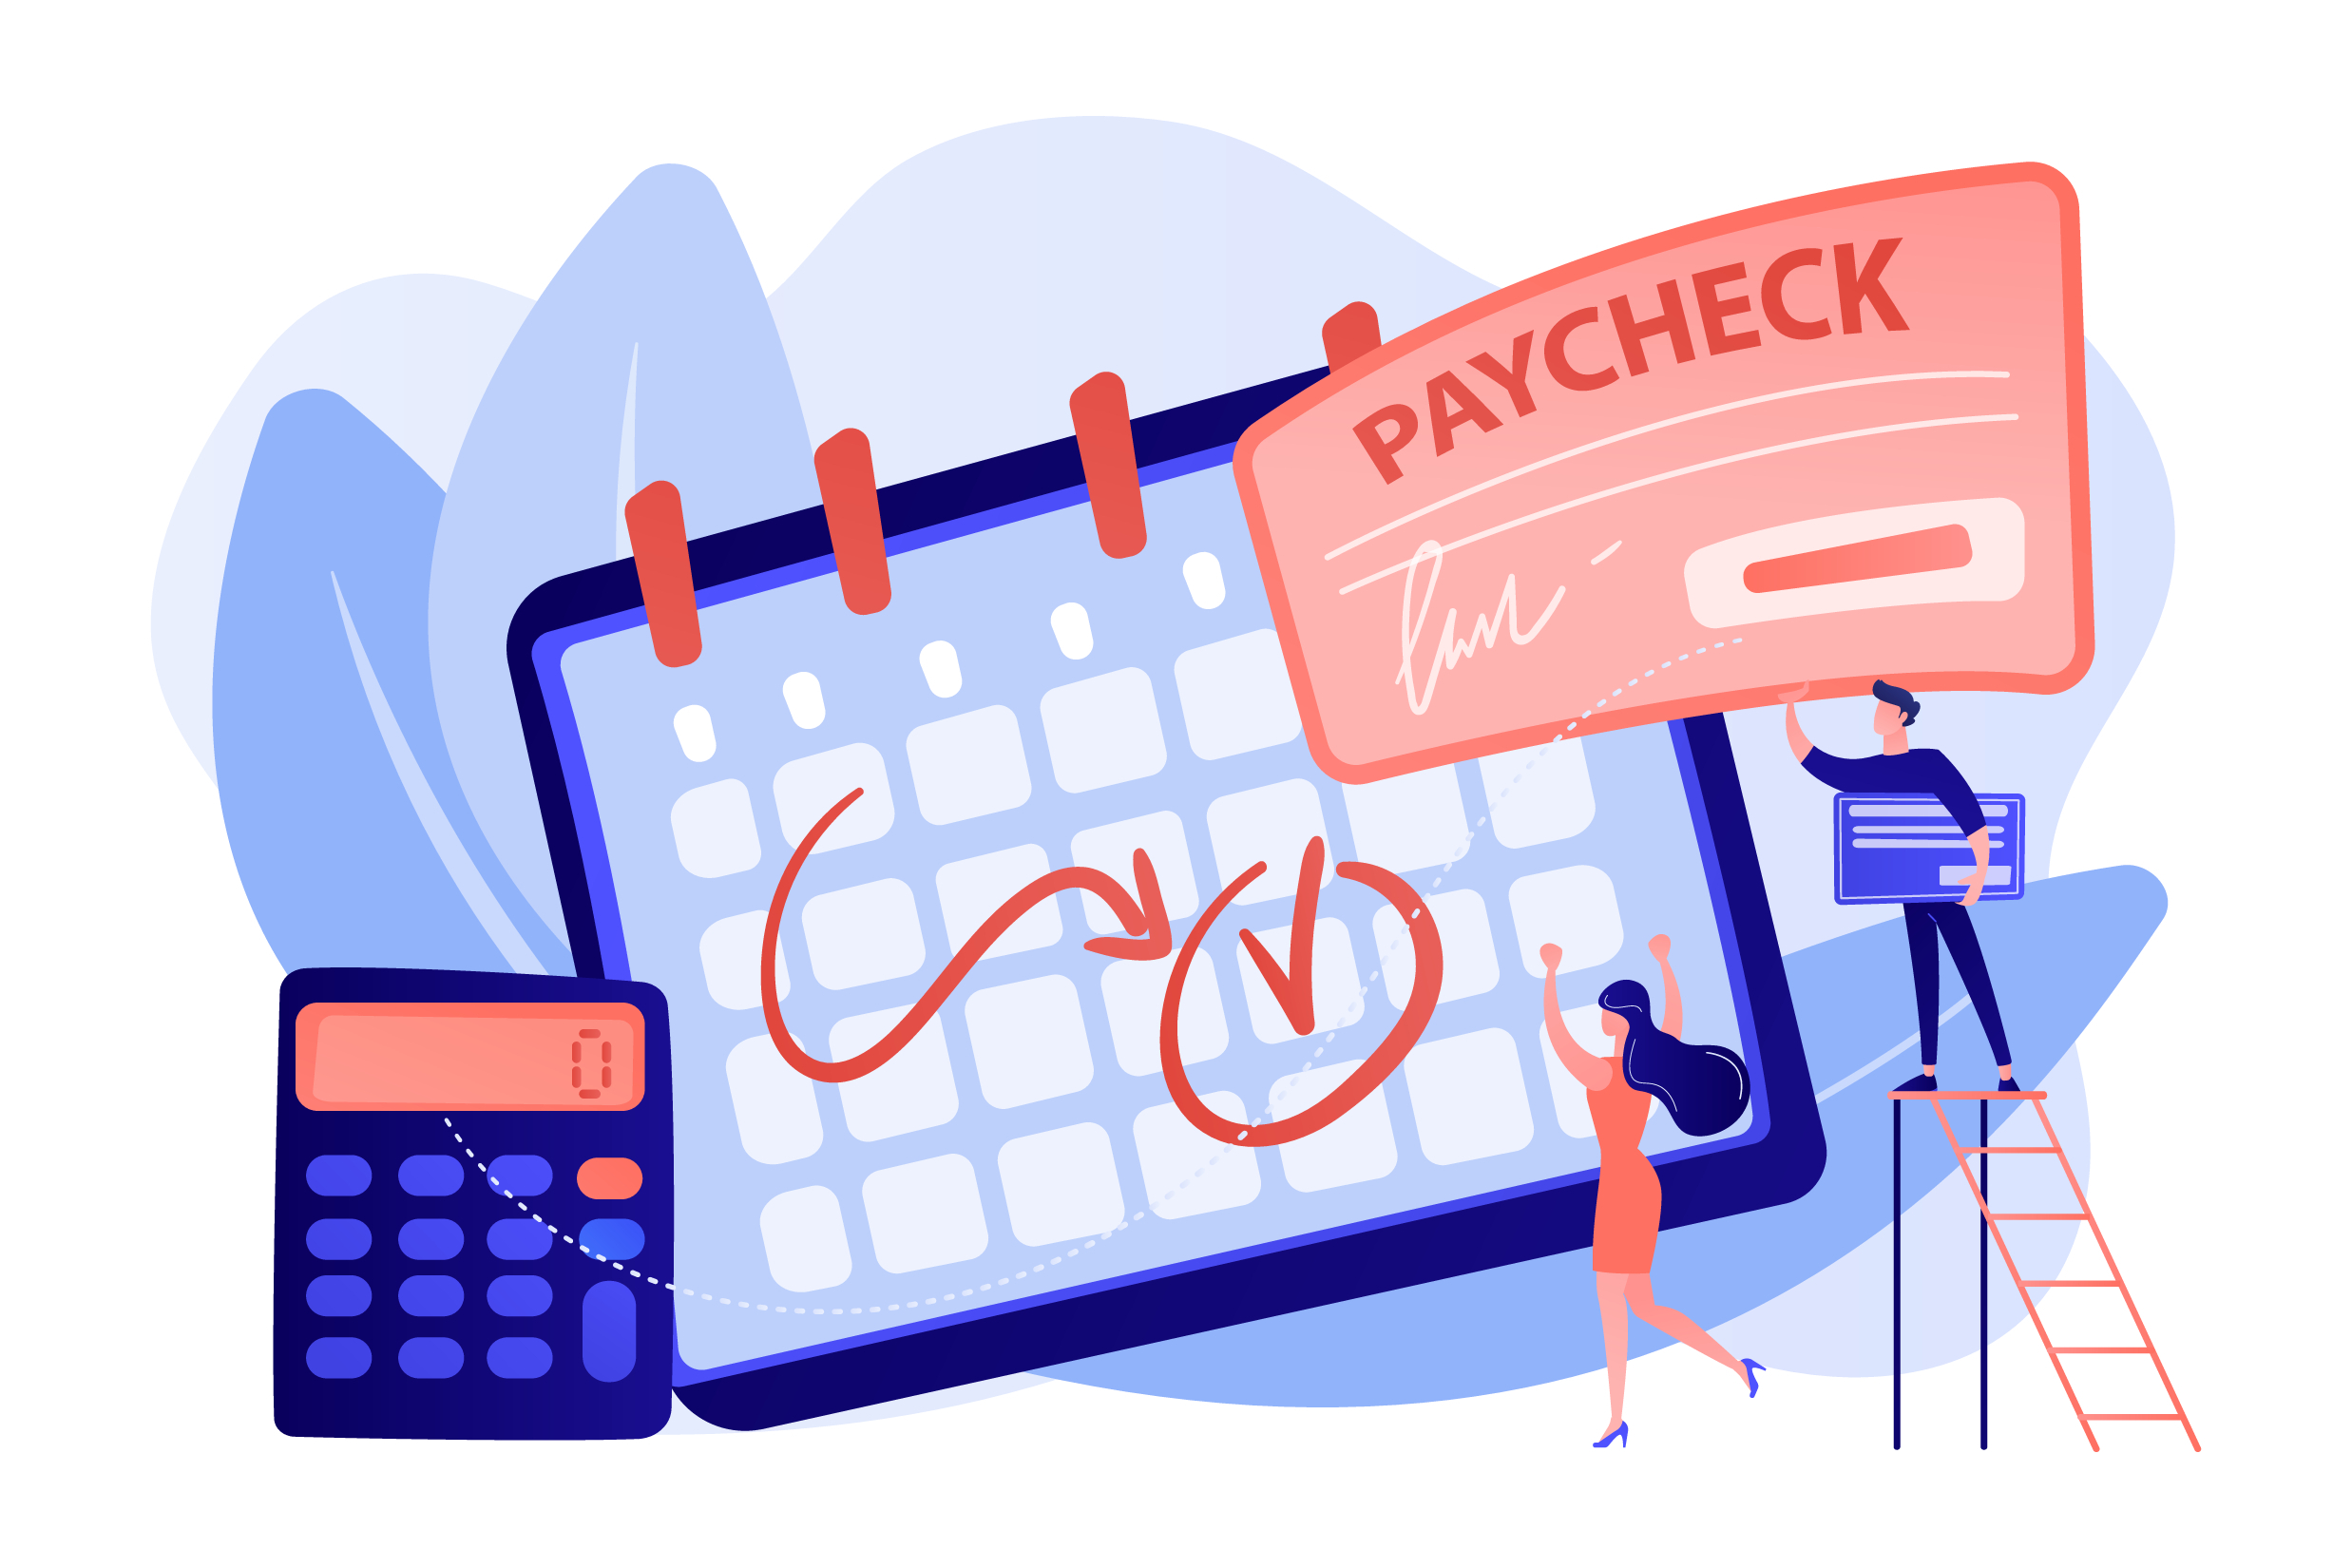 Illustration showing paycheck, calendar, and calculator.